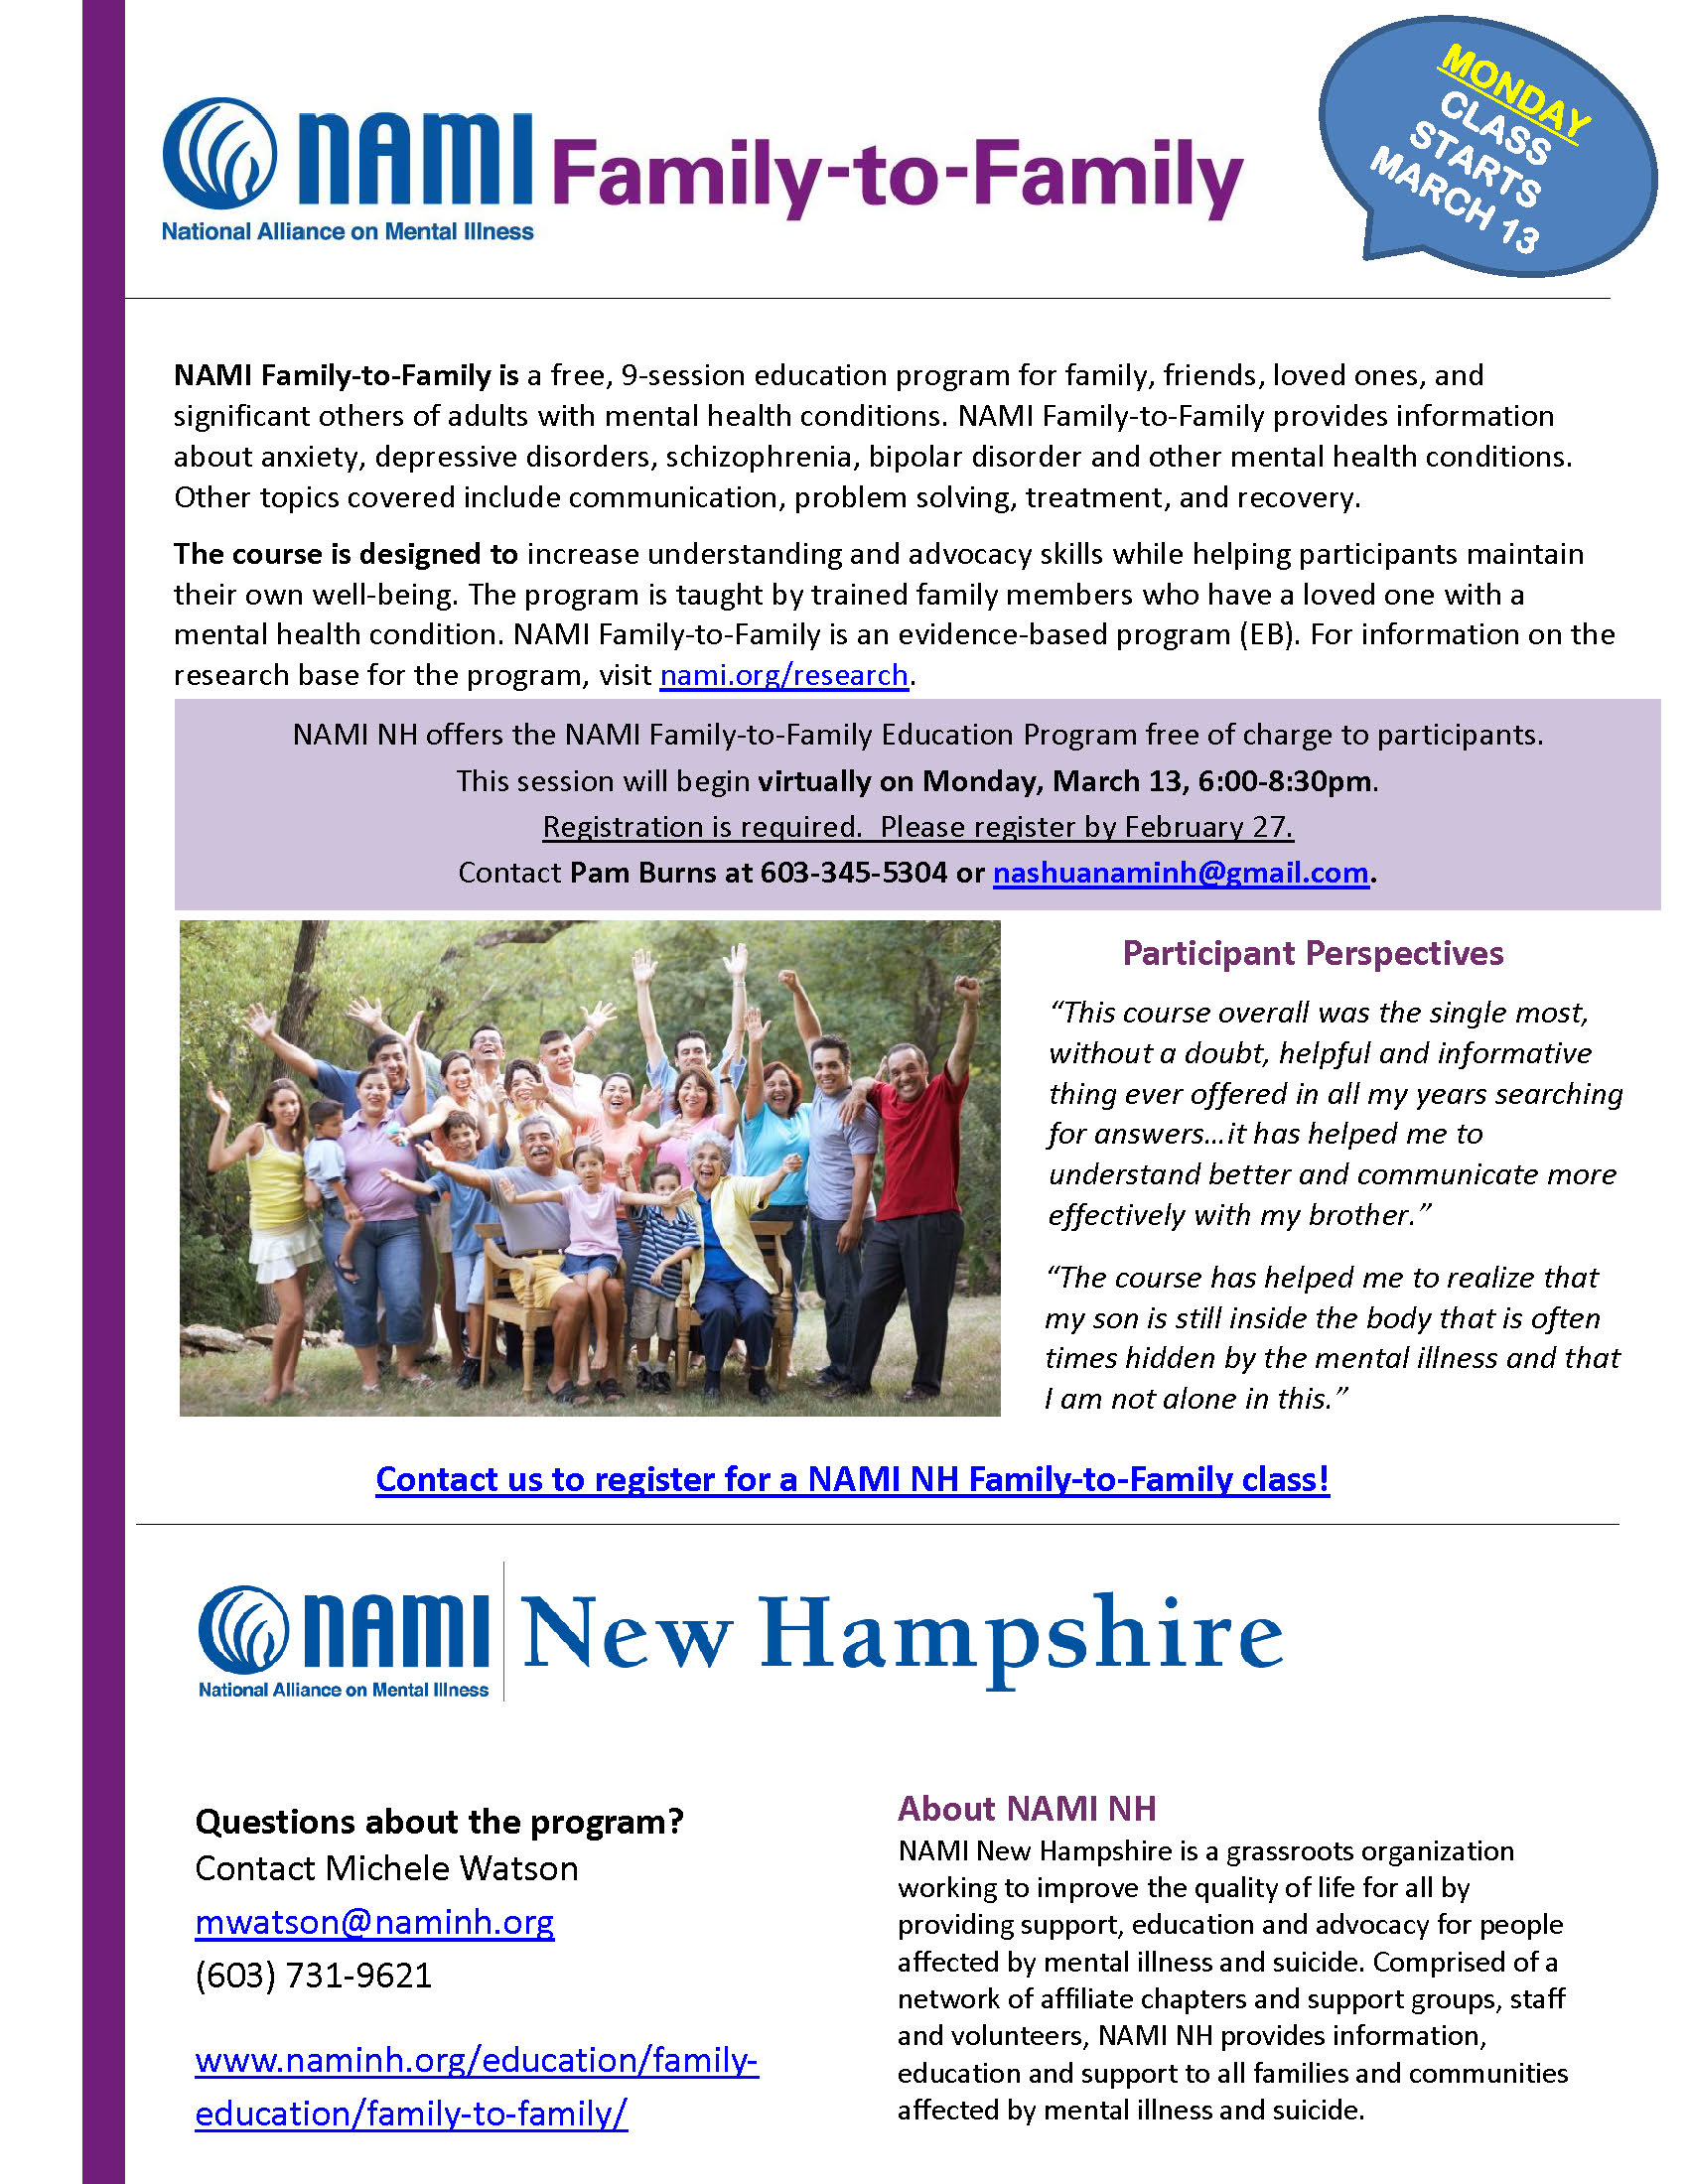 NAMI NH offers the NAMI Family-to-Family Education Program free of charge to participants. This session will begin virtually on Monday, March 13, 6:00-8:30pm. Registration is required. Please register by February 27. Contact Pam Burns at 603-345-5304 or nashuanaminh@gmail.com.